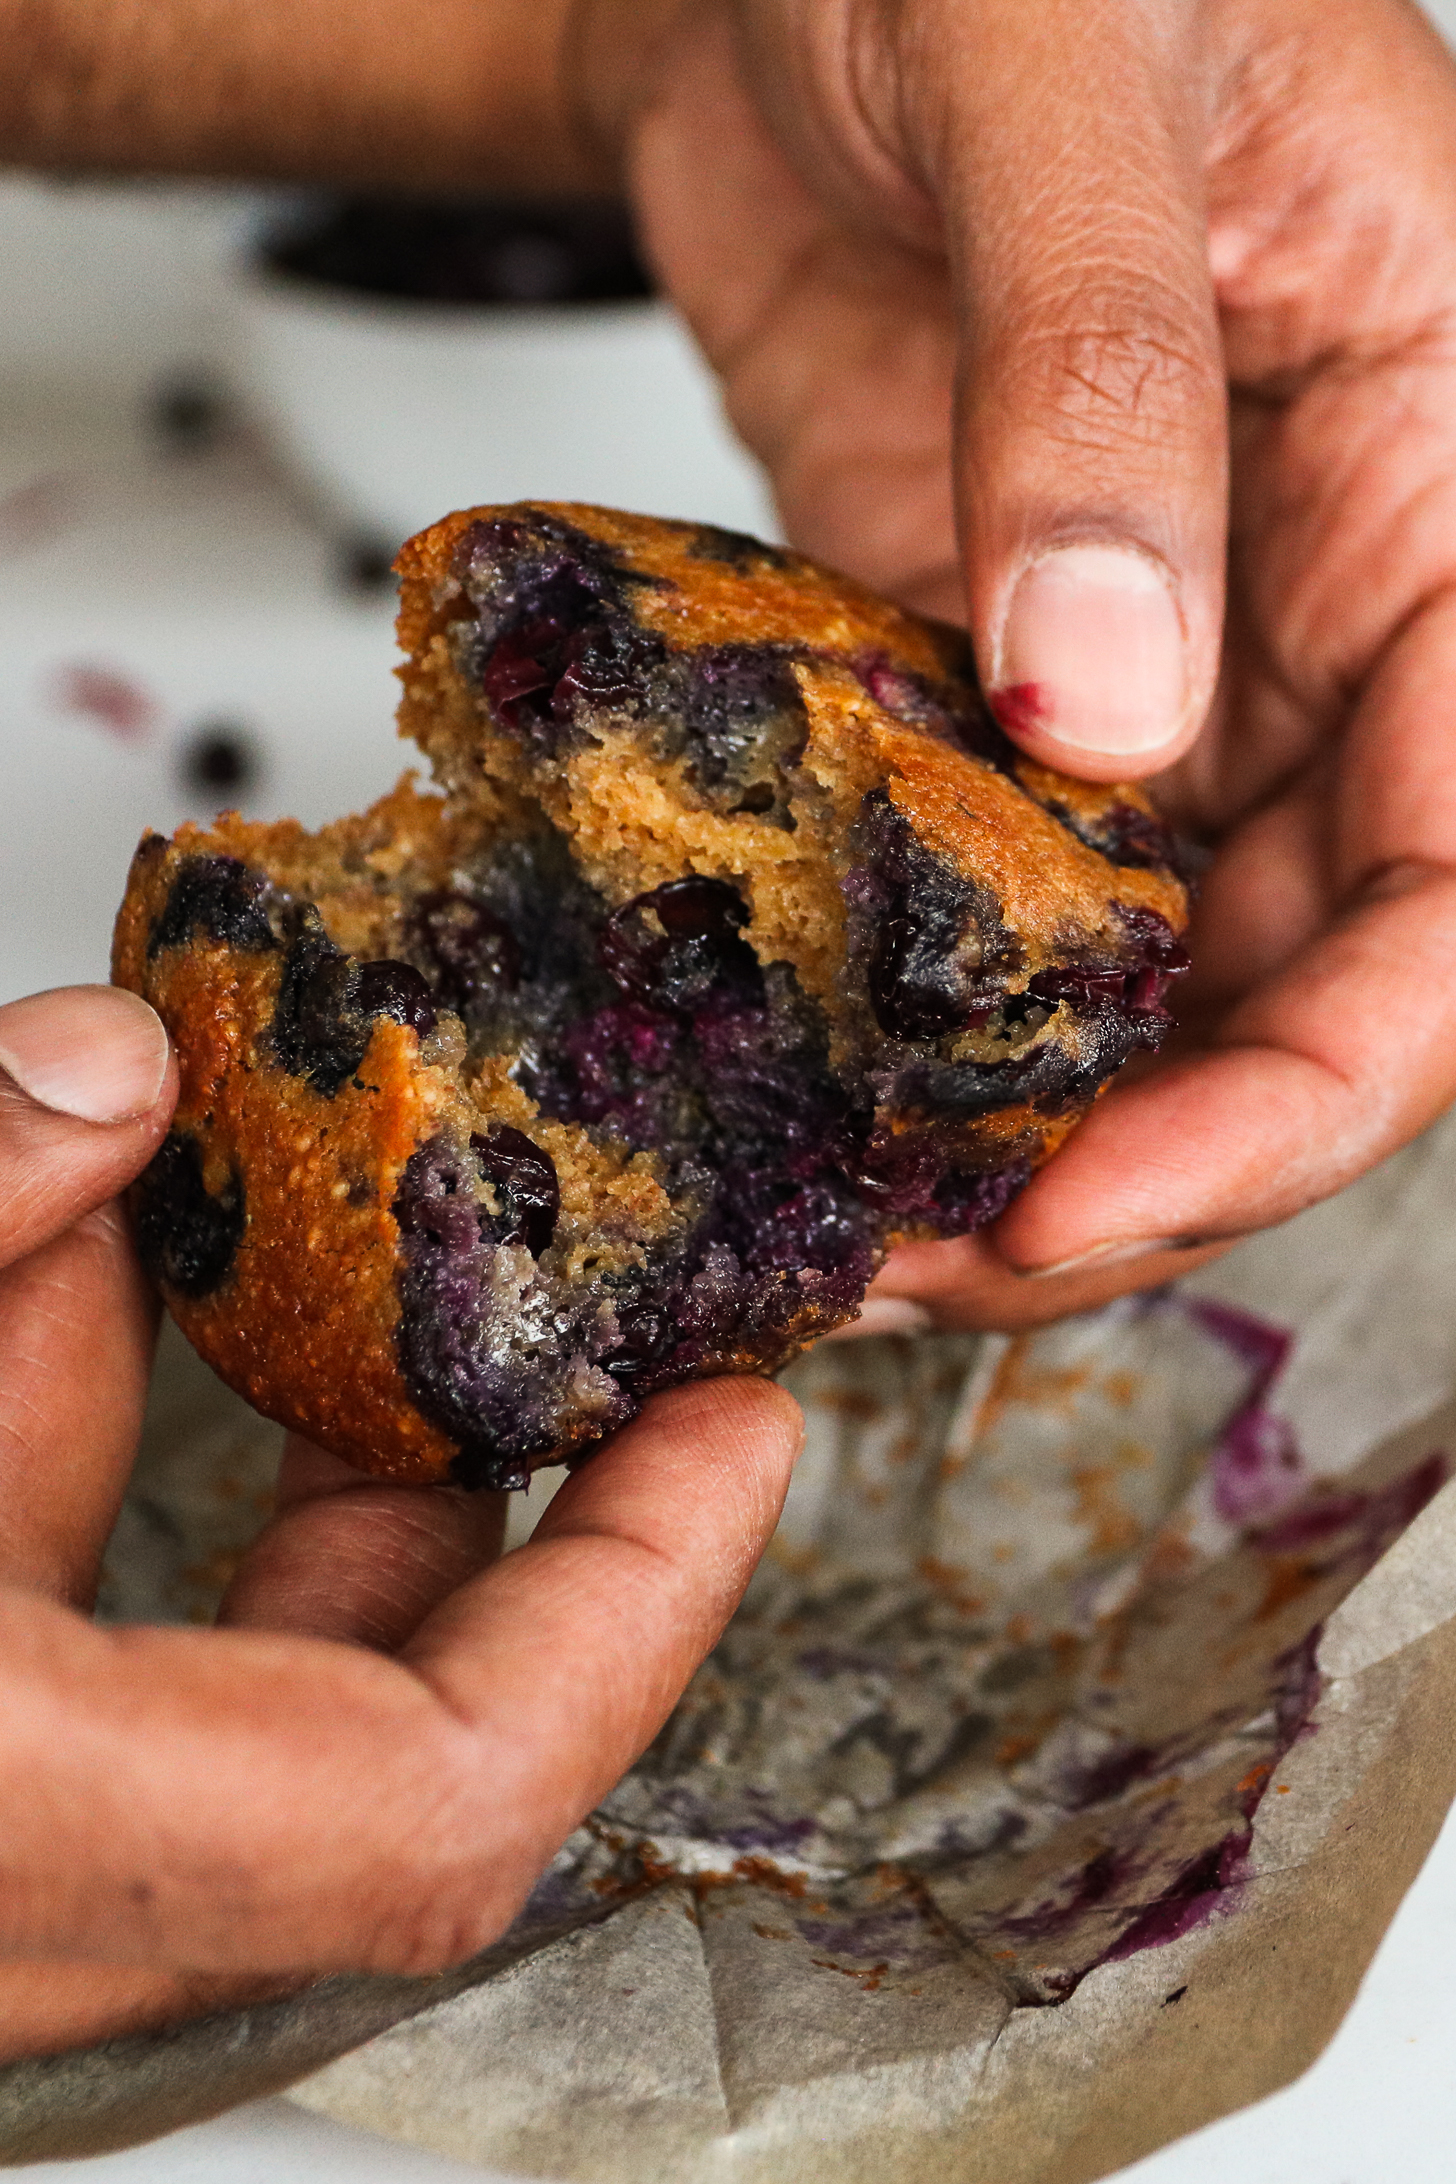 Perspective image of hands holding a blueberry muffin and opening it in half.